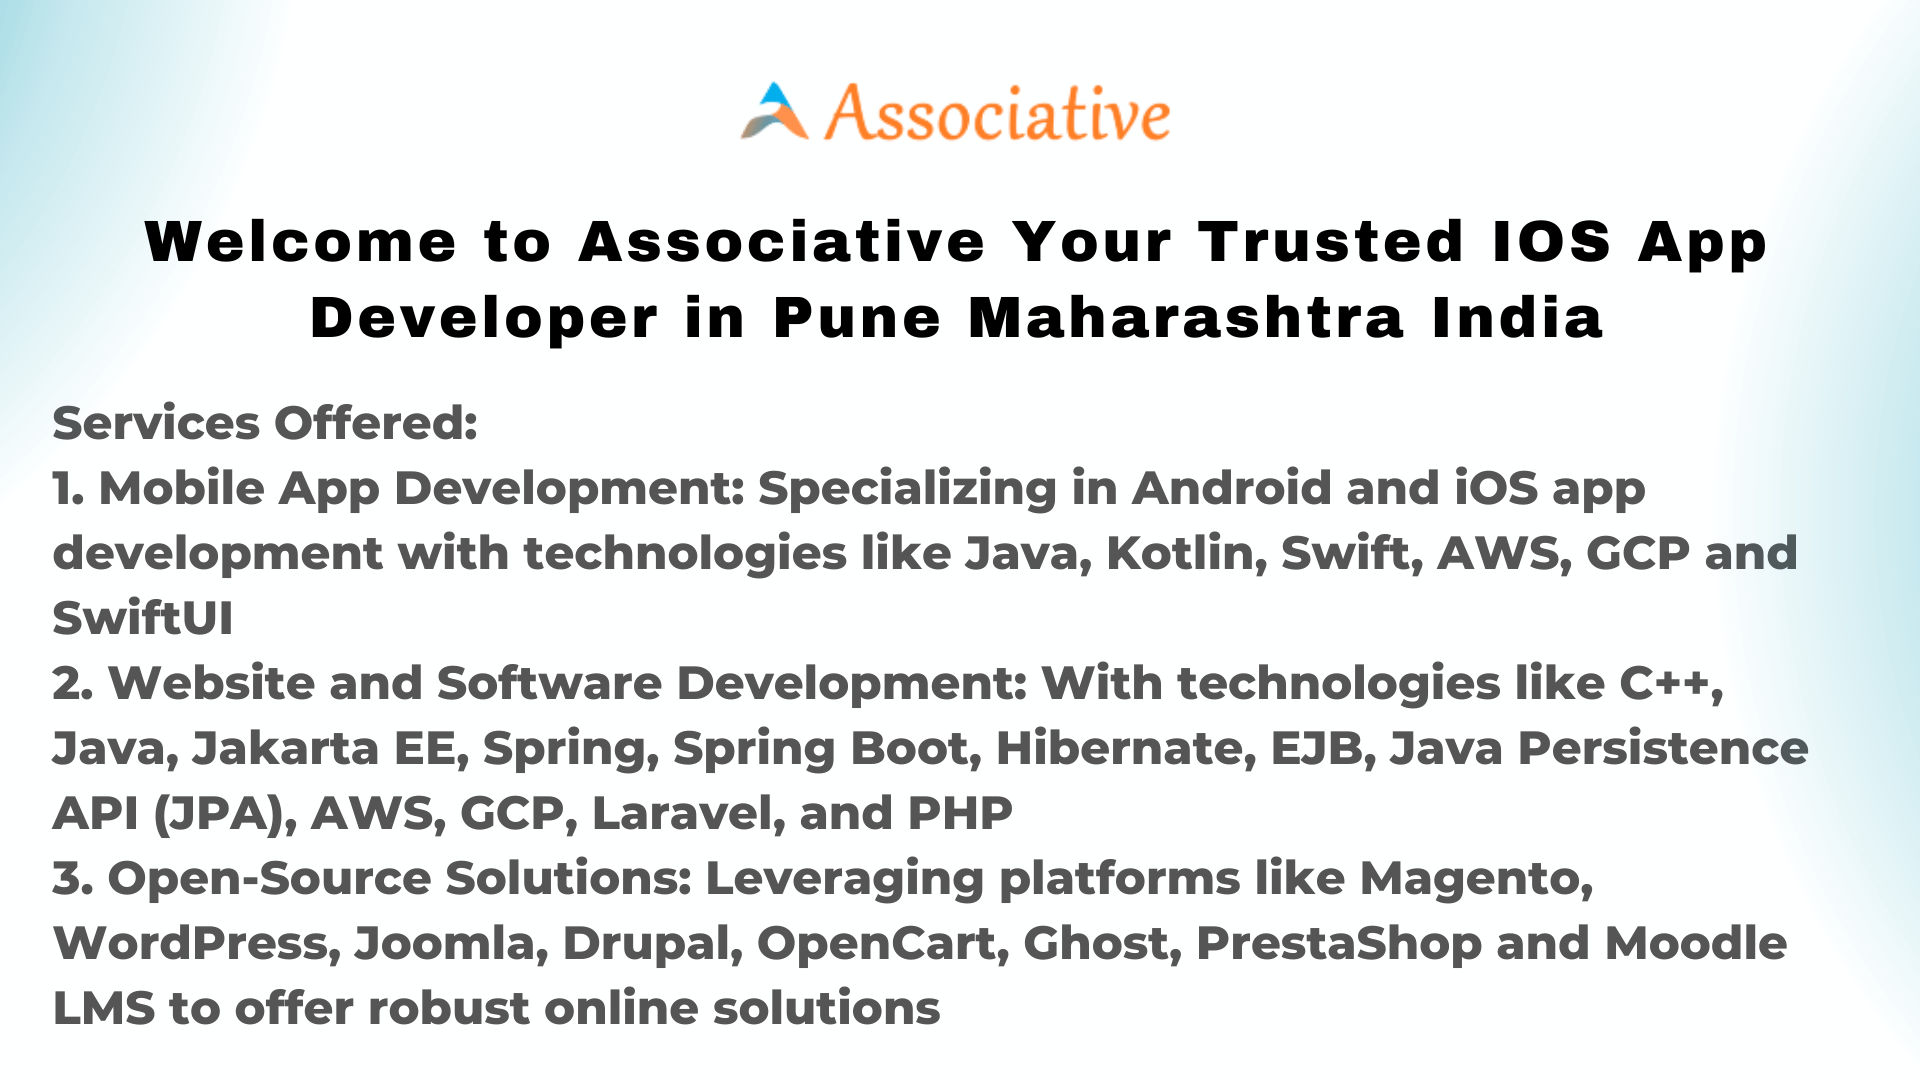 Welcome to Associative Your Trusted iOS App Developer in Pune Maharashtra India